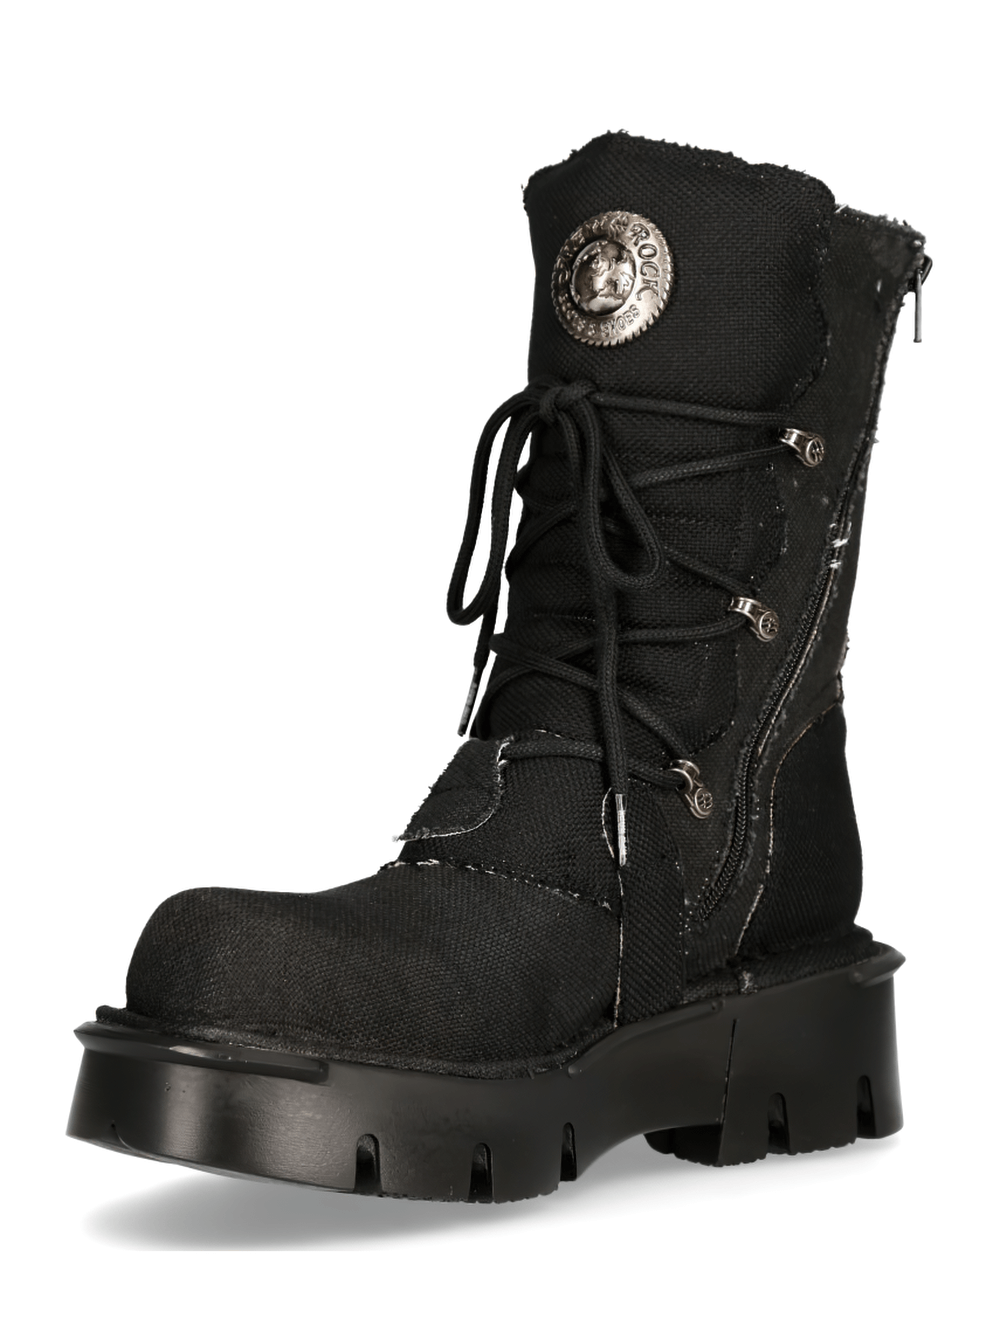 NEW ROCK Black Rock Buckled Boots with Gothic Flair